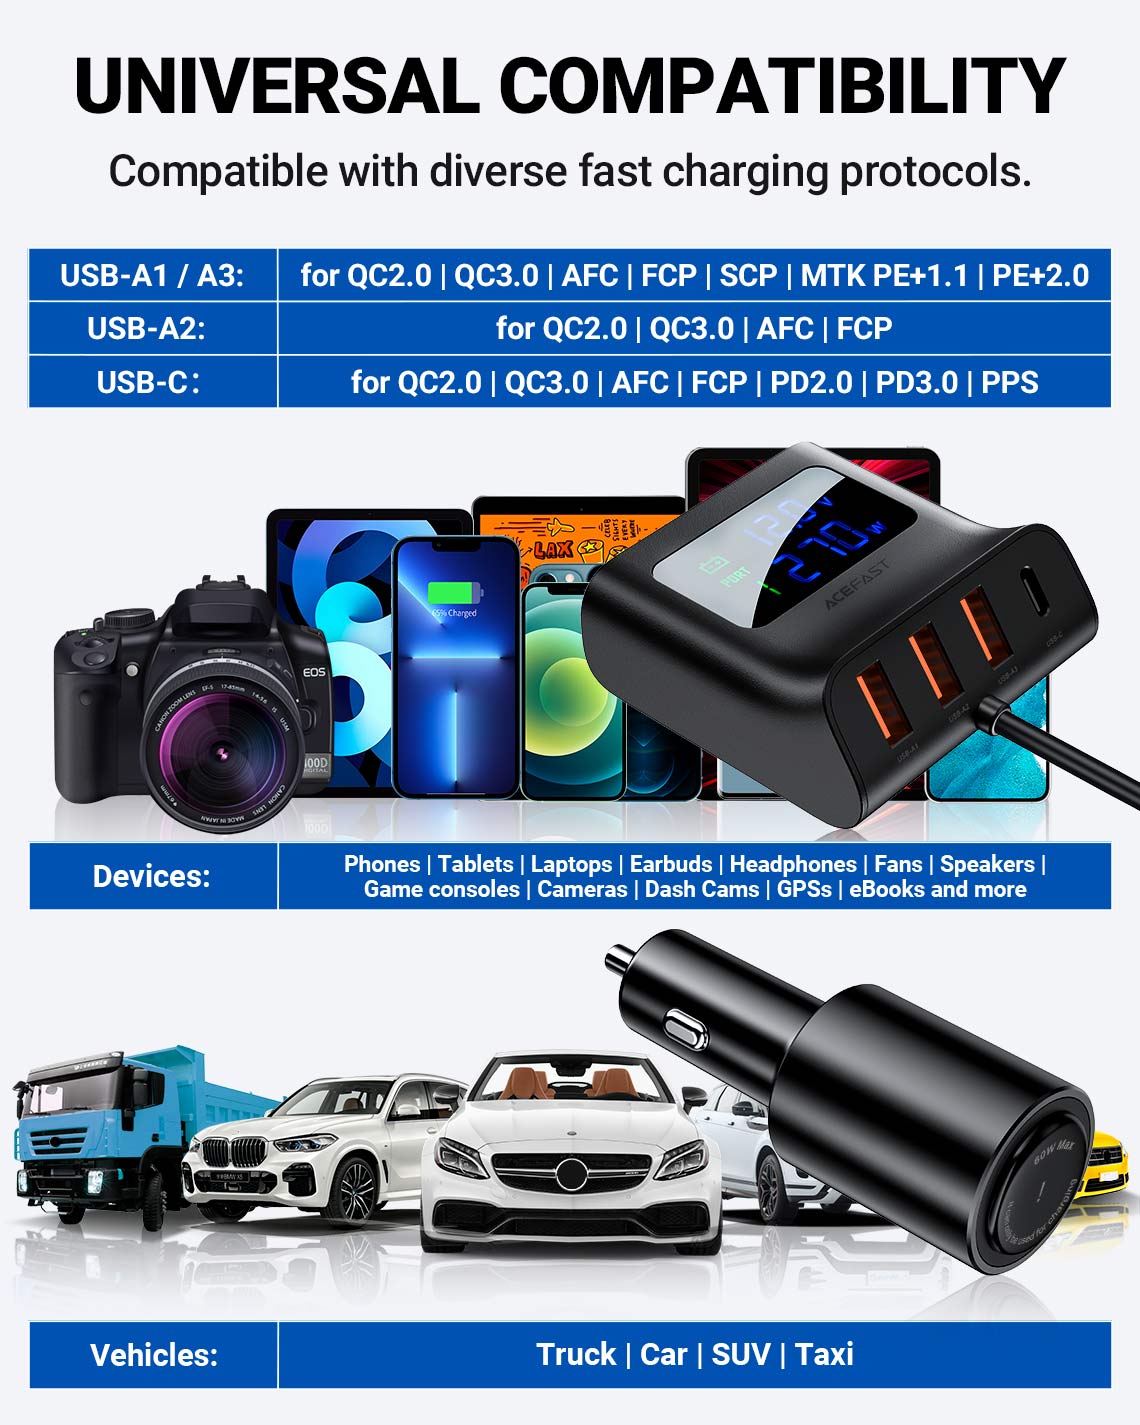 acefast-b8-car-hub-charger-universal-compatibility_1